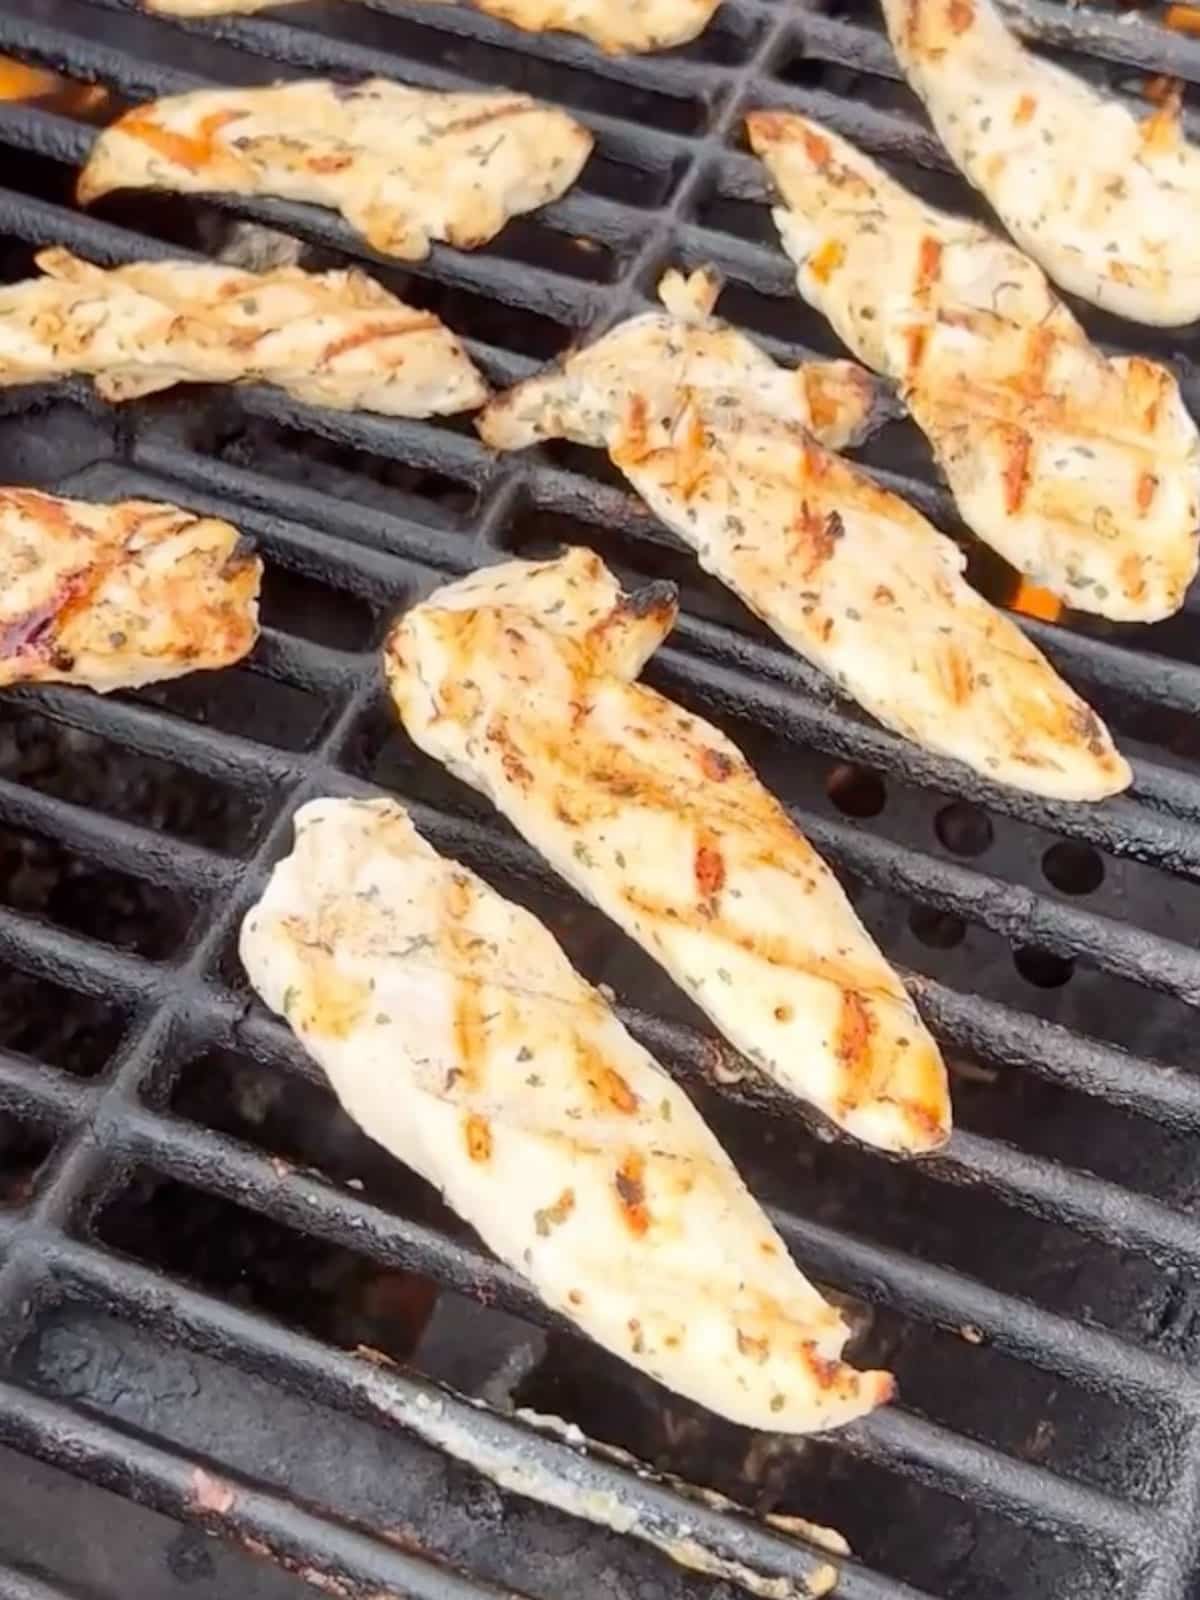 Chicken pieces being cooked on a grill.